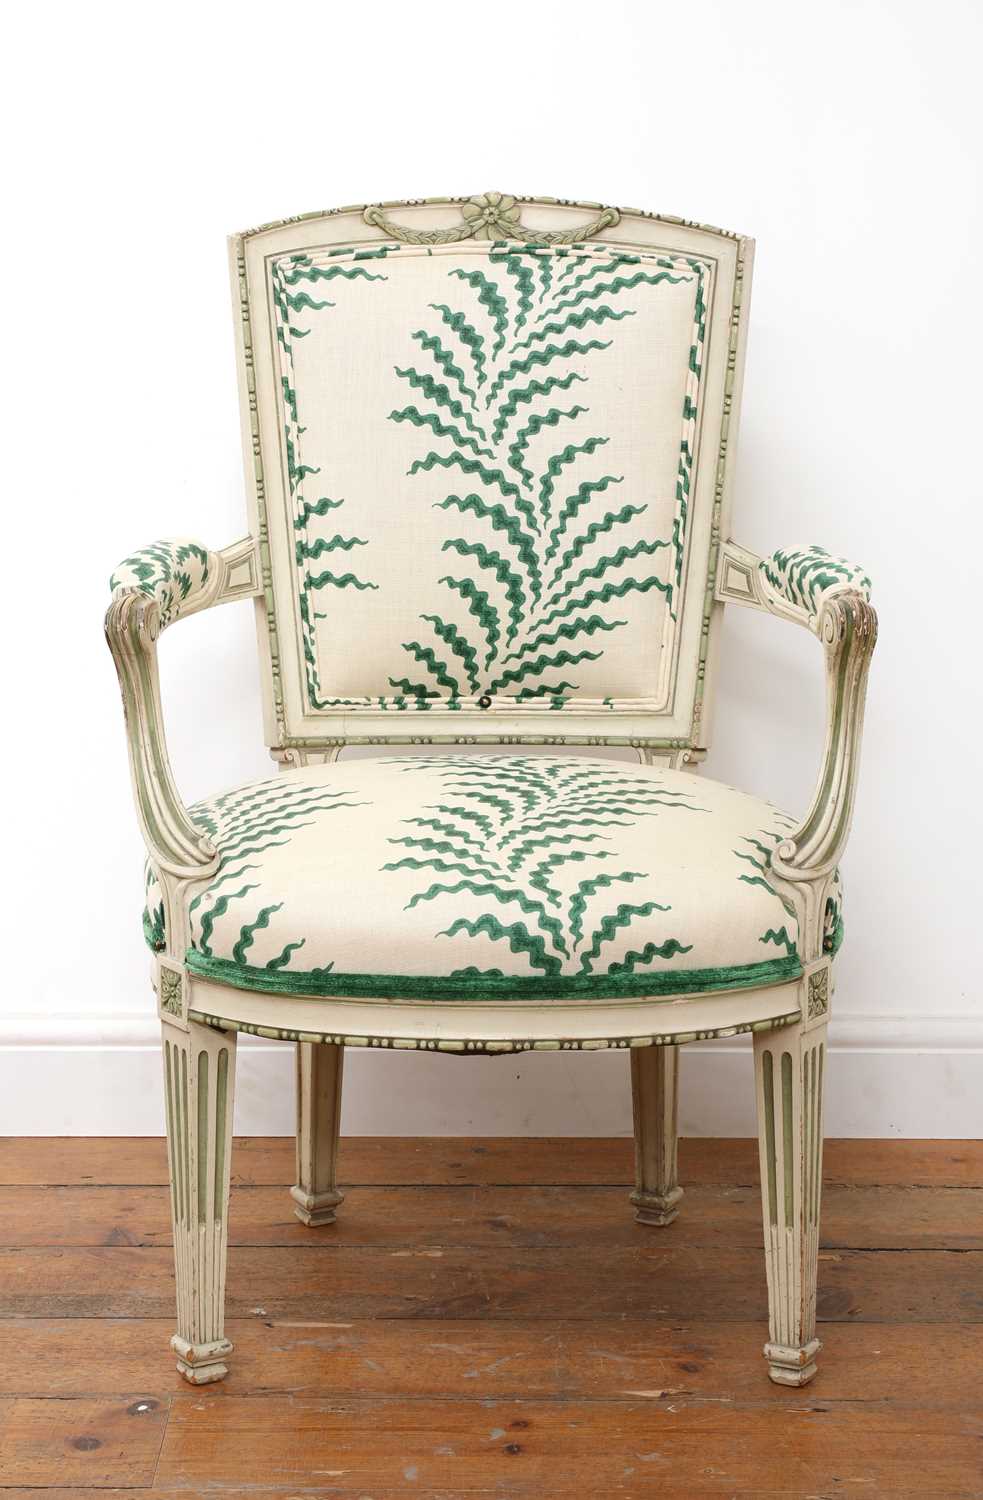 Lot 416 - A French Louis XVI-style painted fauteuil